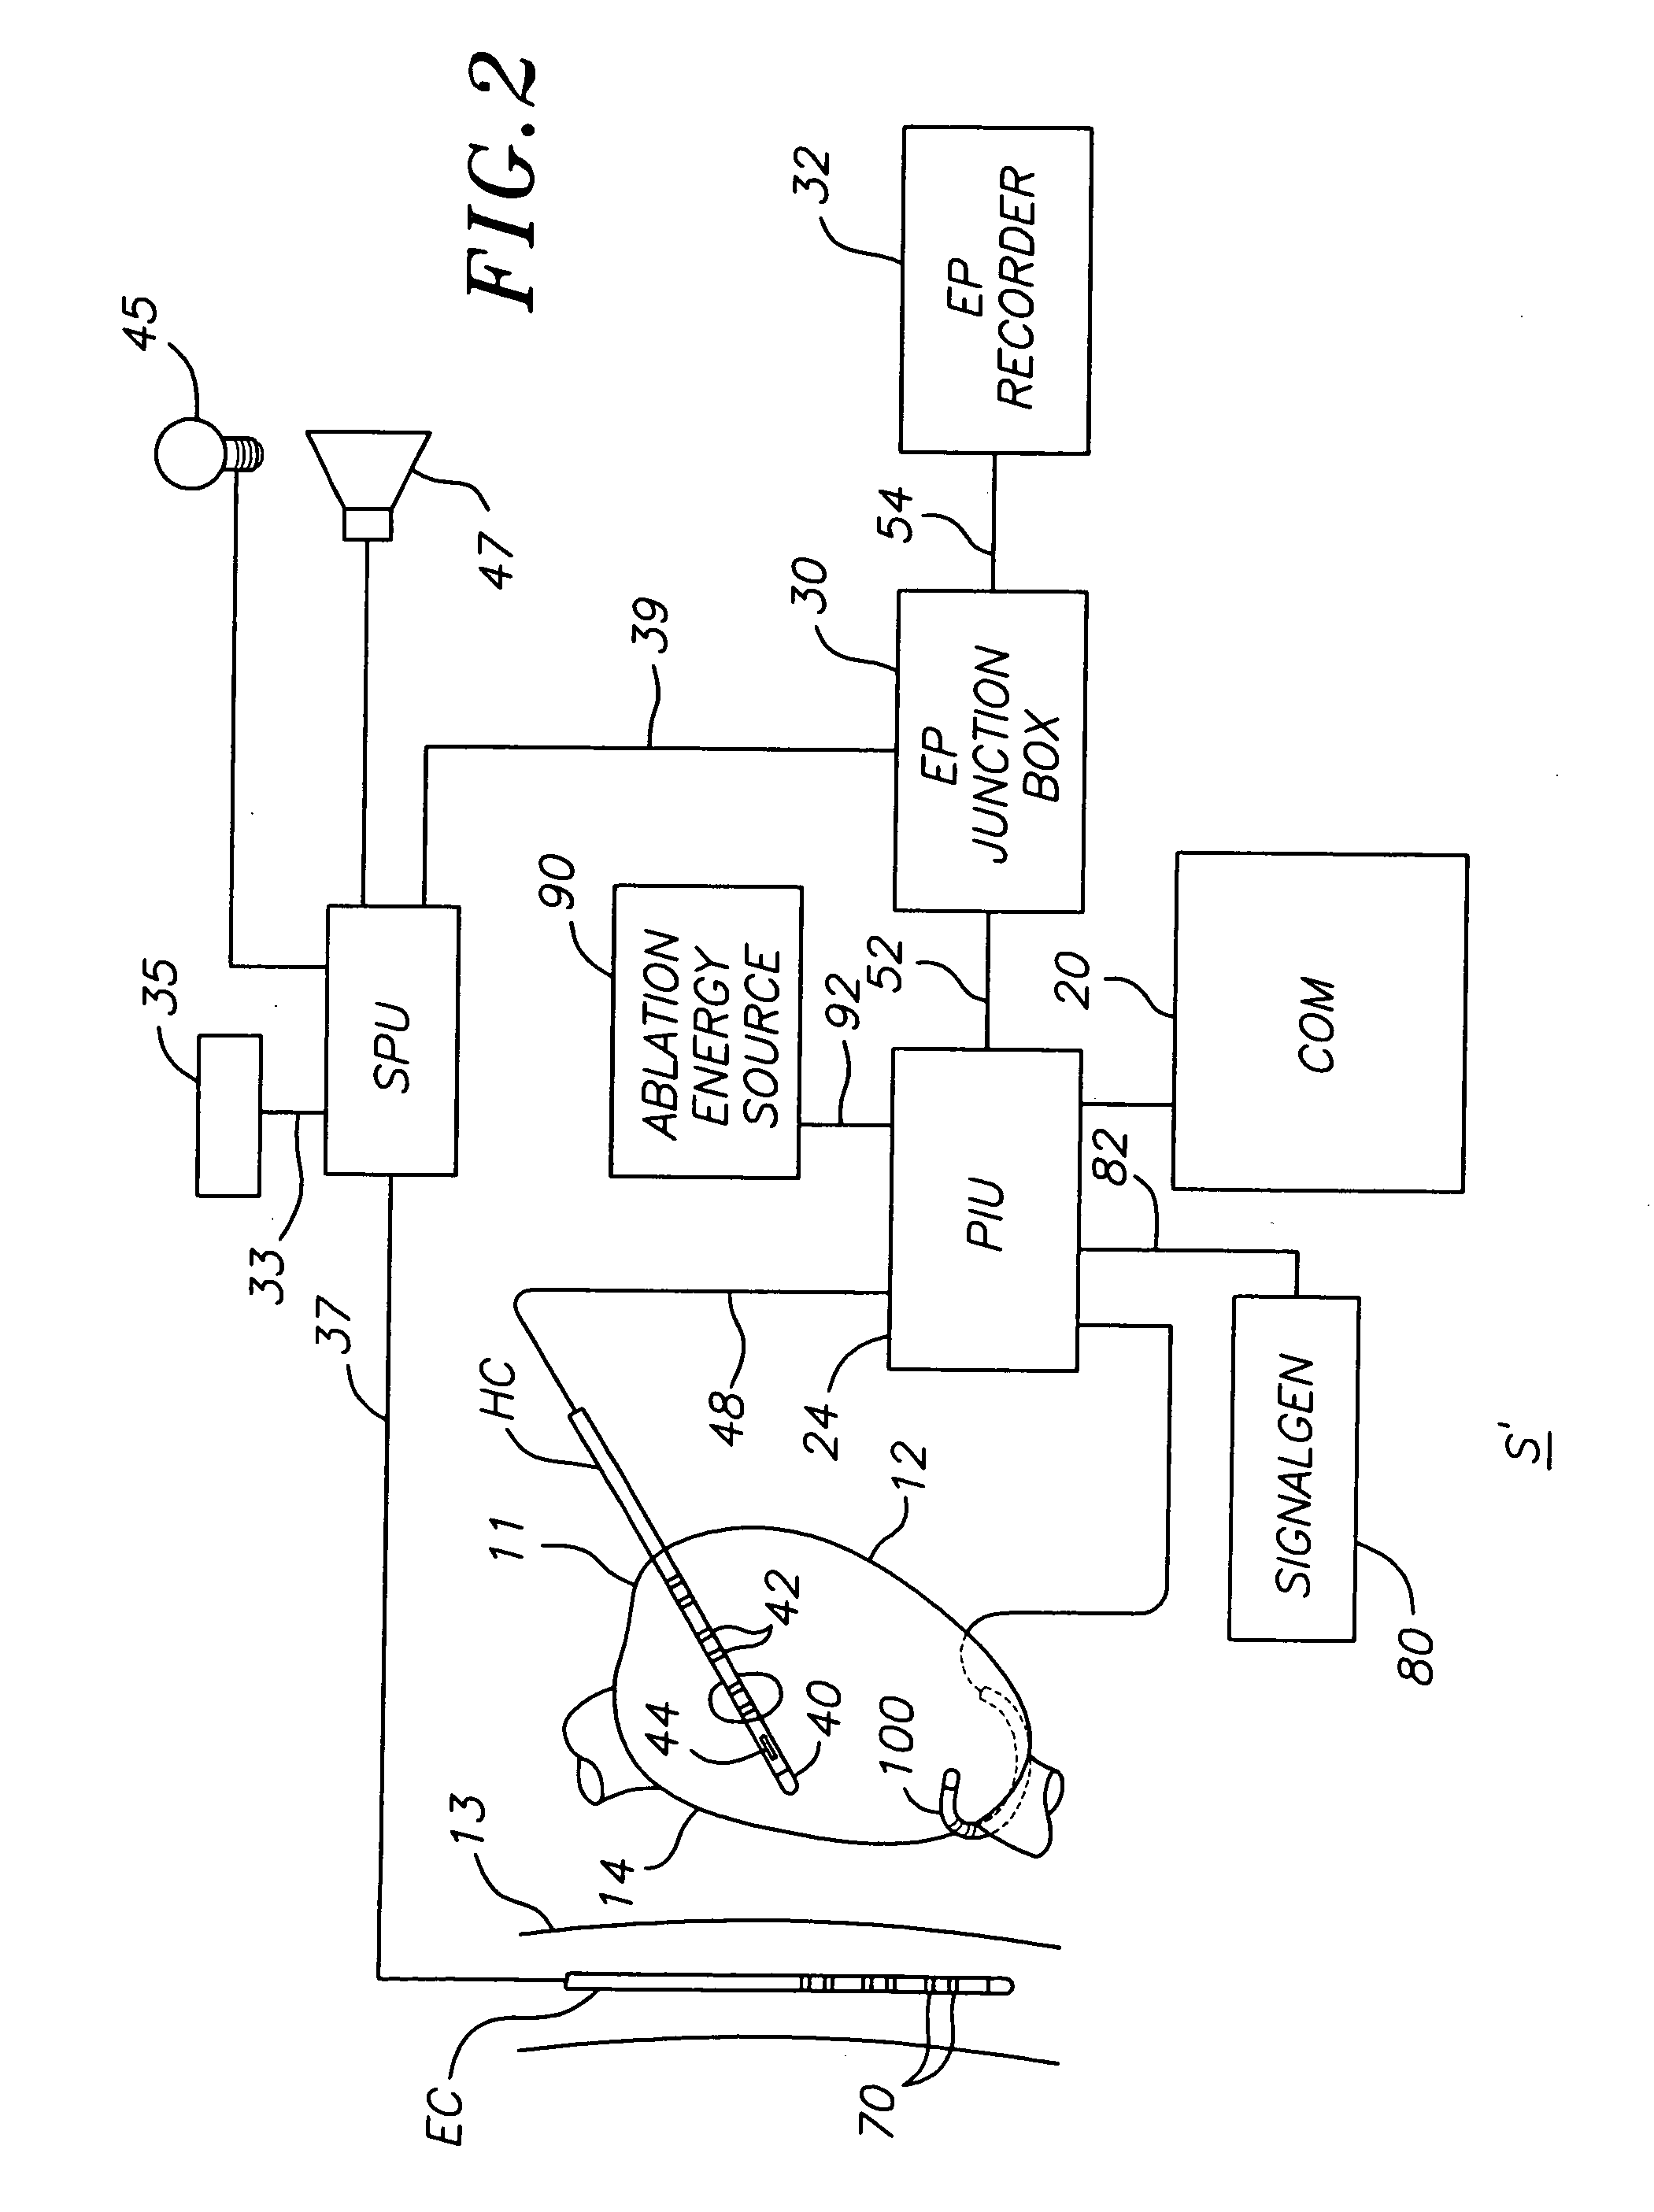 System and method for measuring esophagus proximity